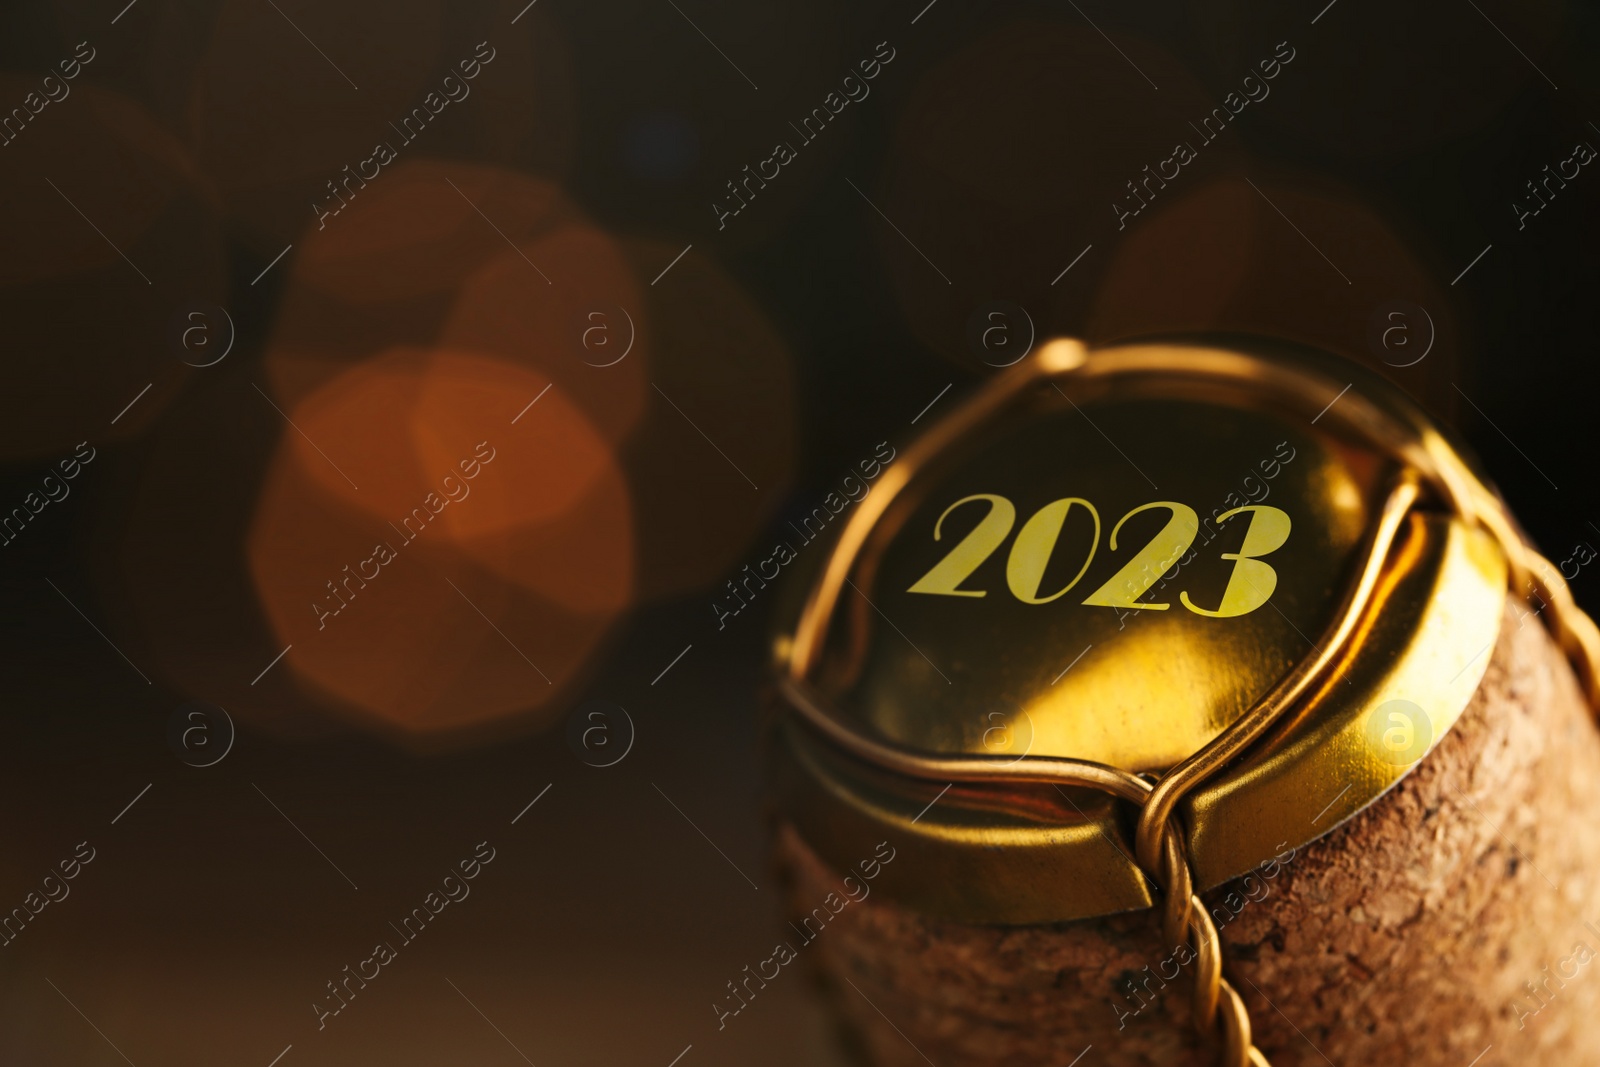 Image of Cork of sparkling wine and muselet cap with engraving 2023 against blurred festive lights, closeup. Bokeh effect